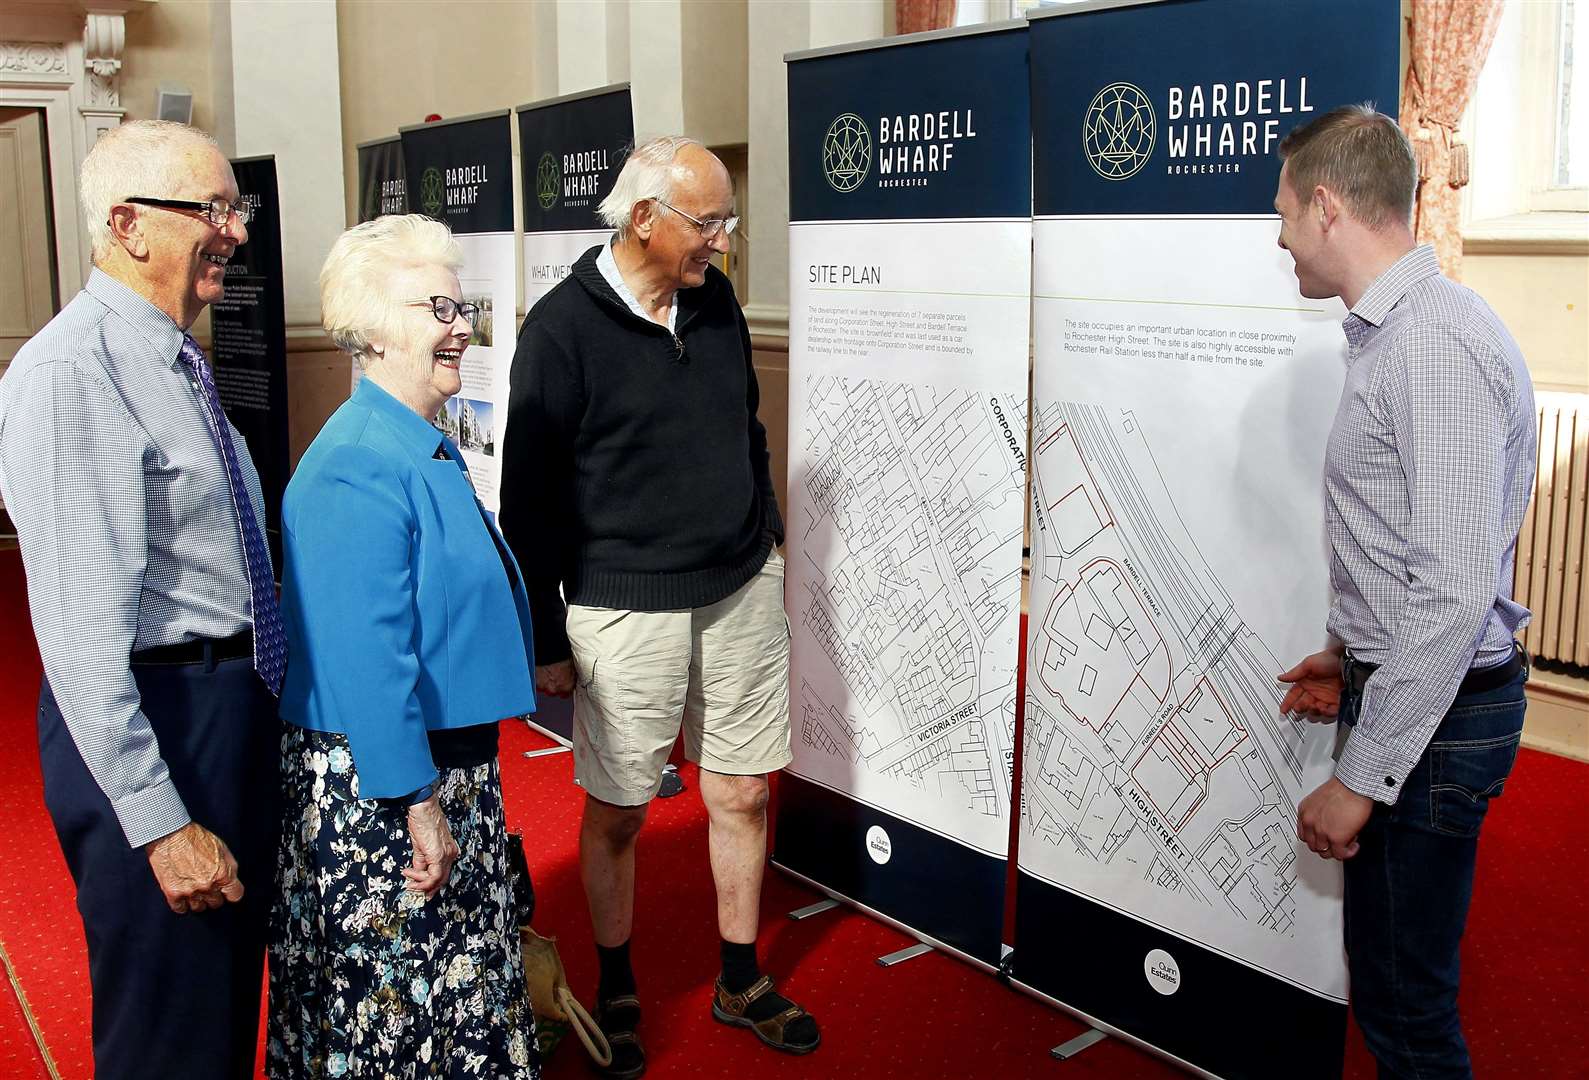 A 2018 exhibition about the development at Bardell Wharf